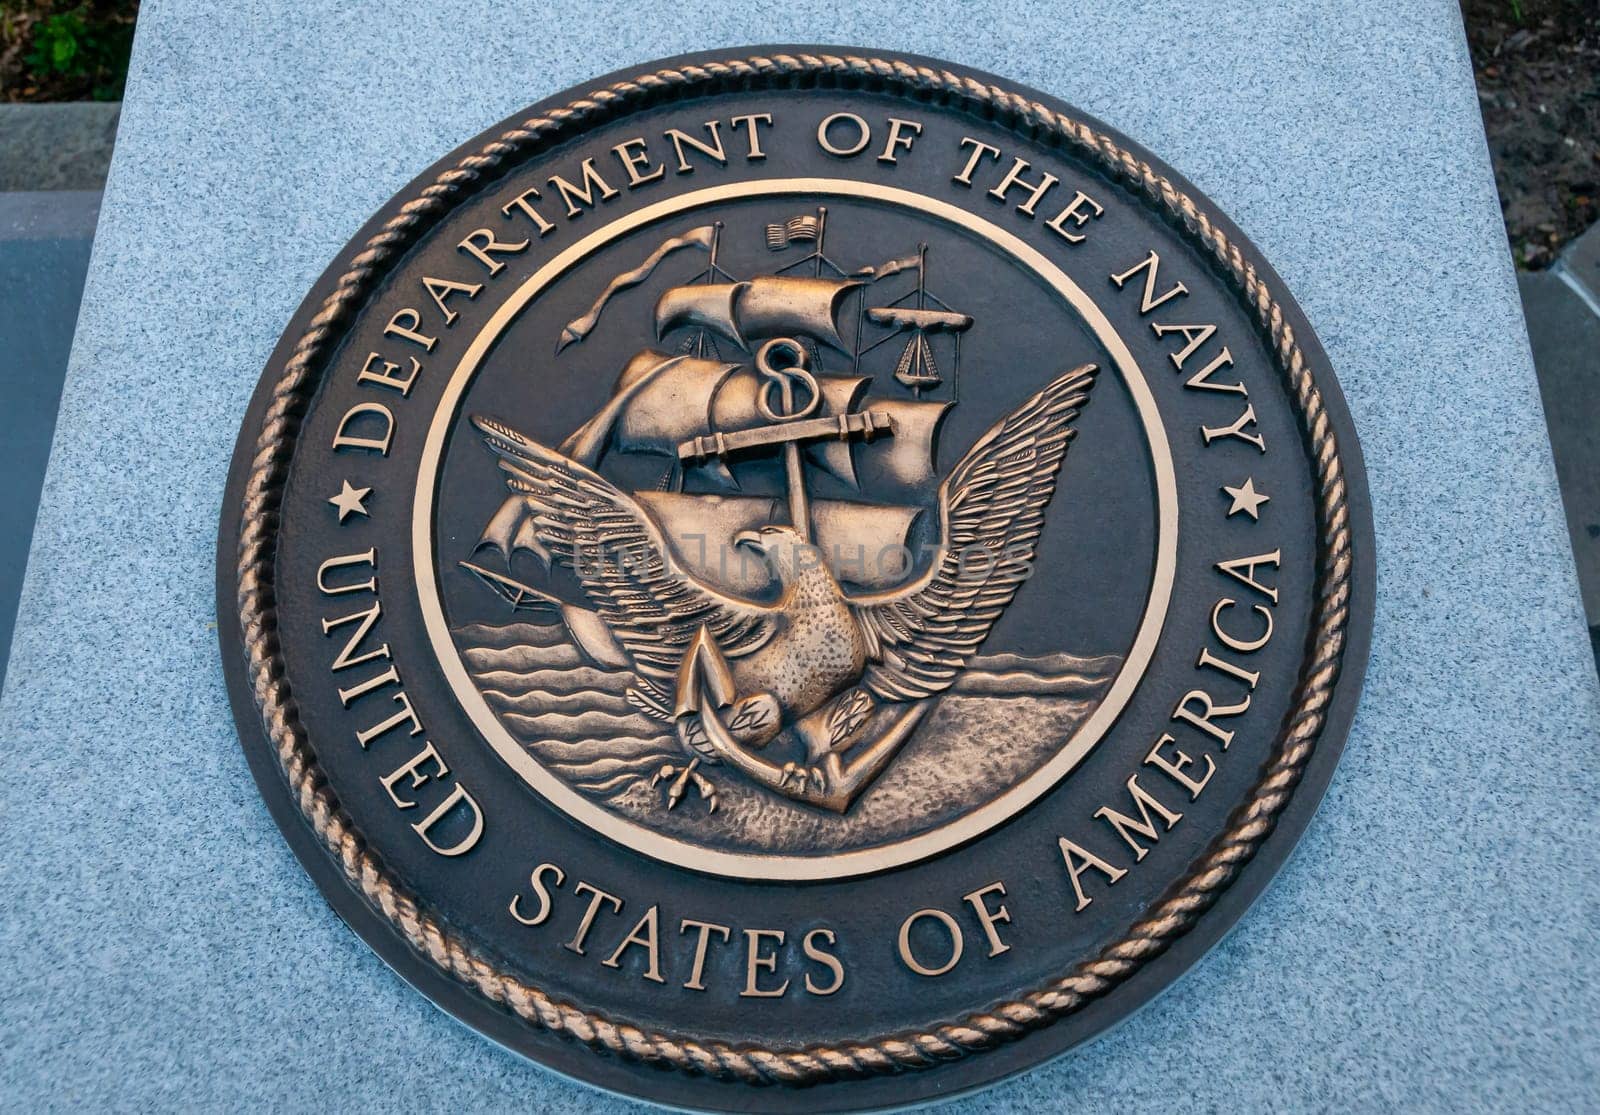 SAVANNAH, USA - DECEMBER 02, 2011: Department of the Army logo on the monument in the city of Savannah